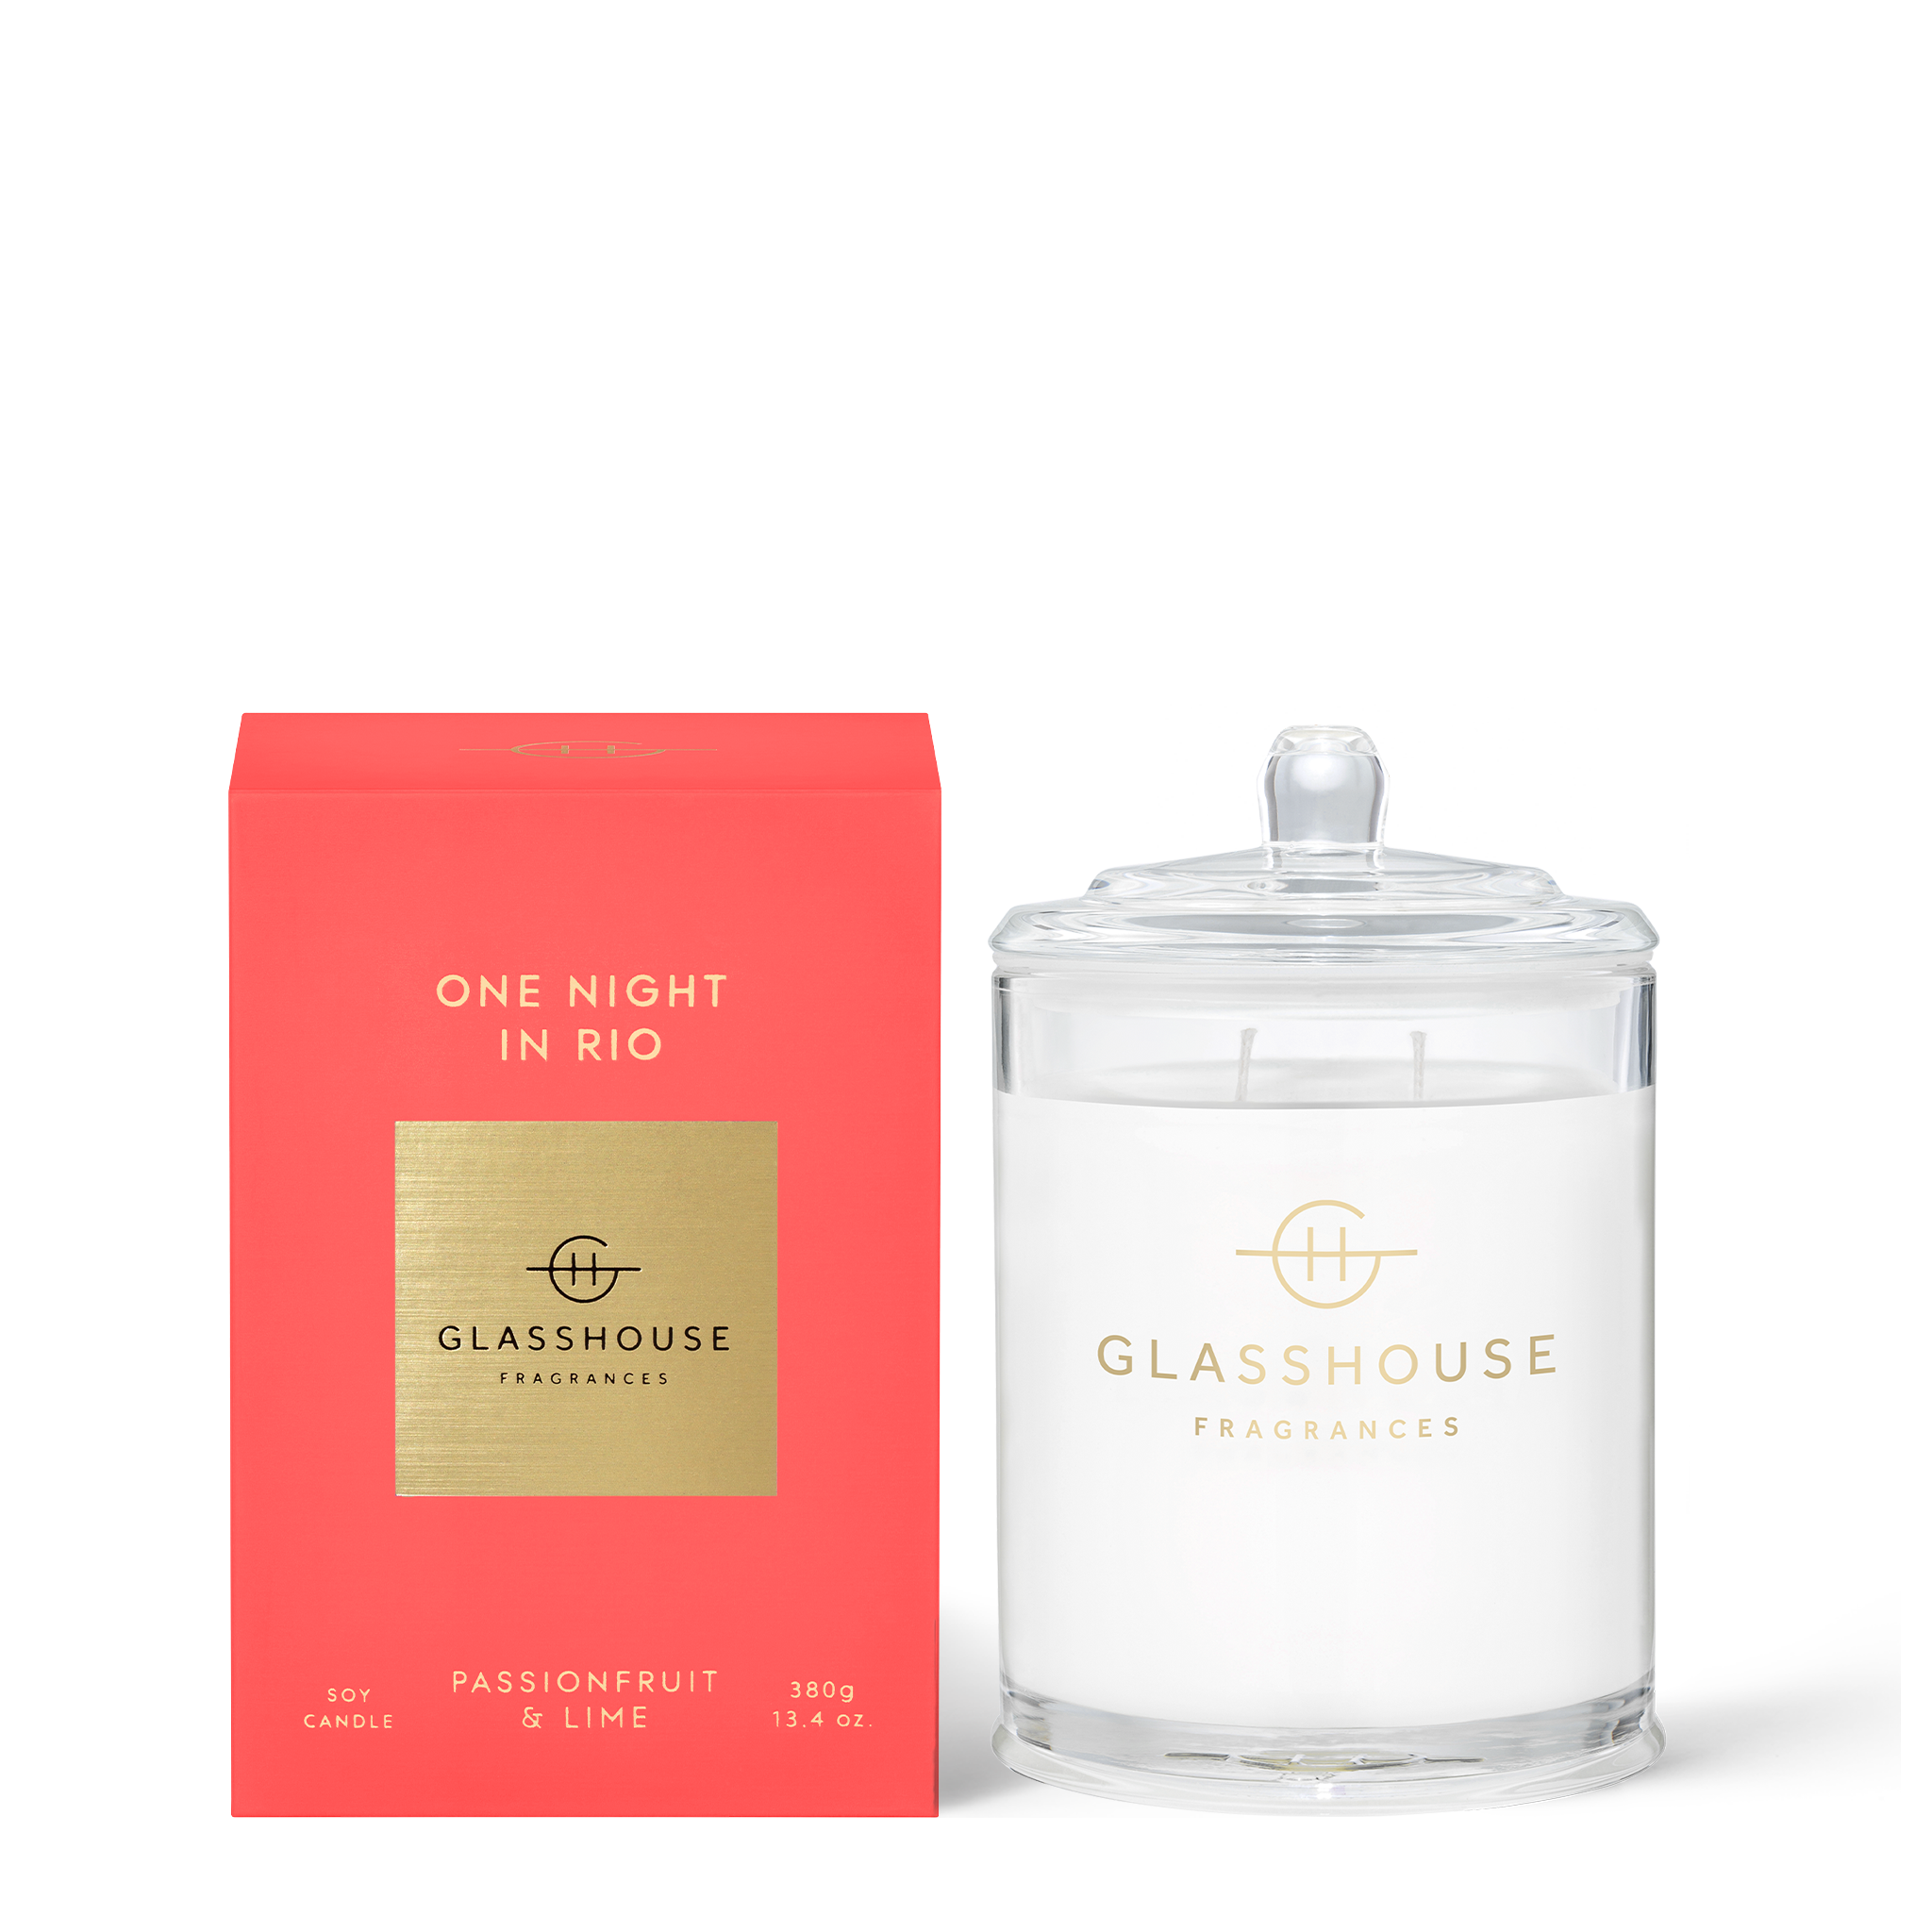 ONE NIGHT IN RIO | Passionfruit & Lime | 380g Soy Candle